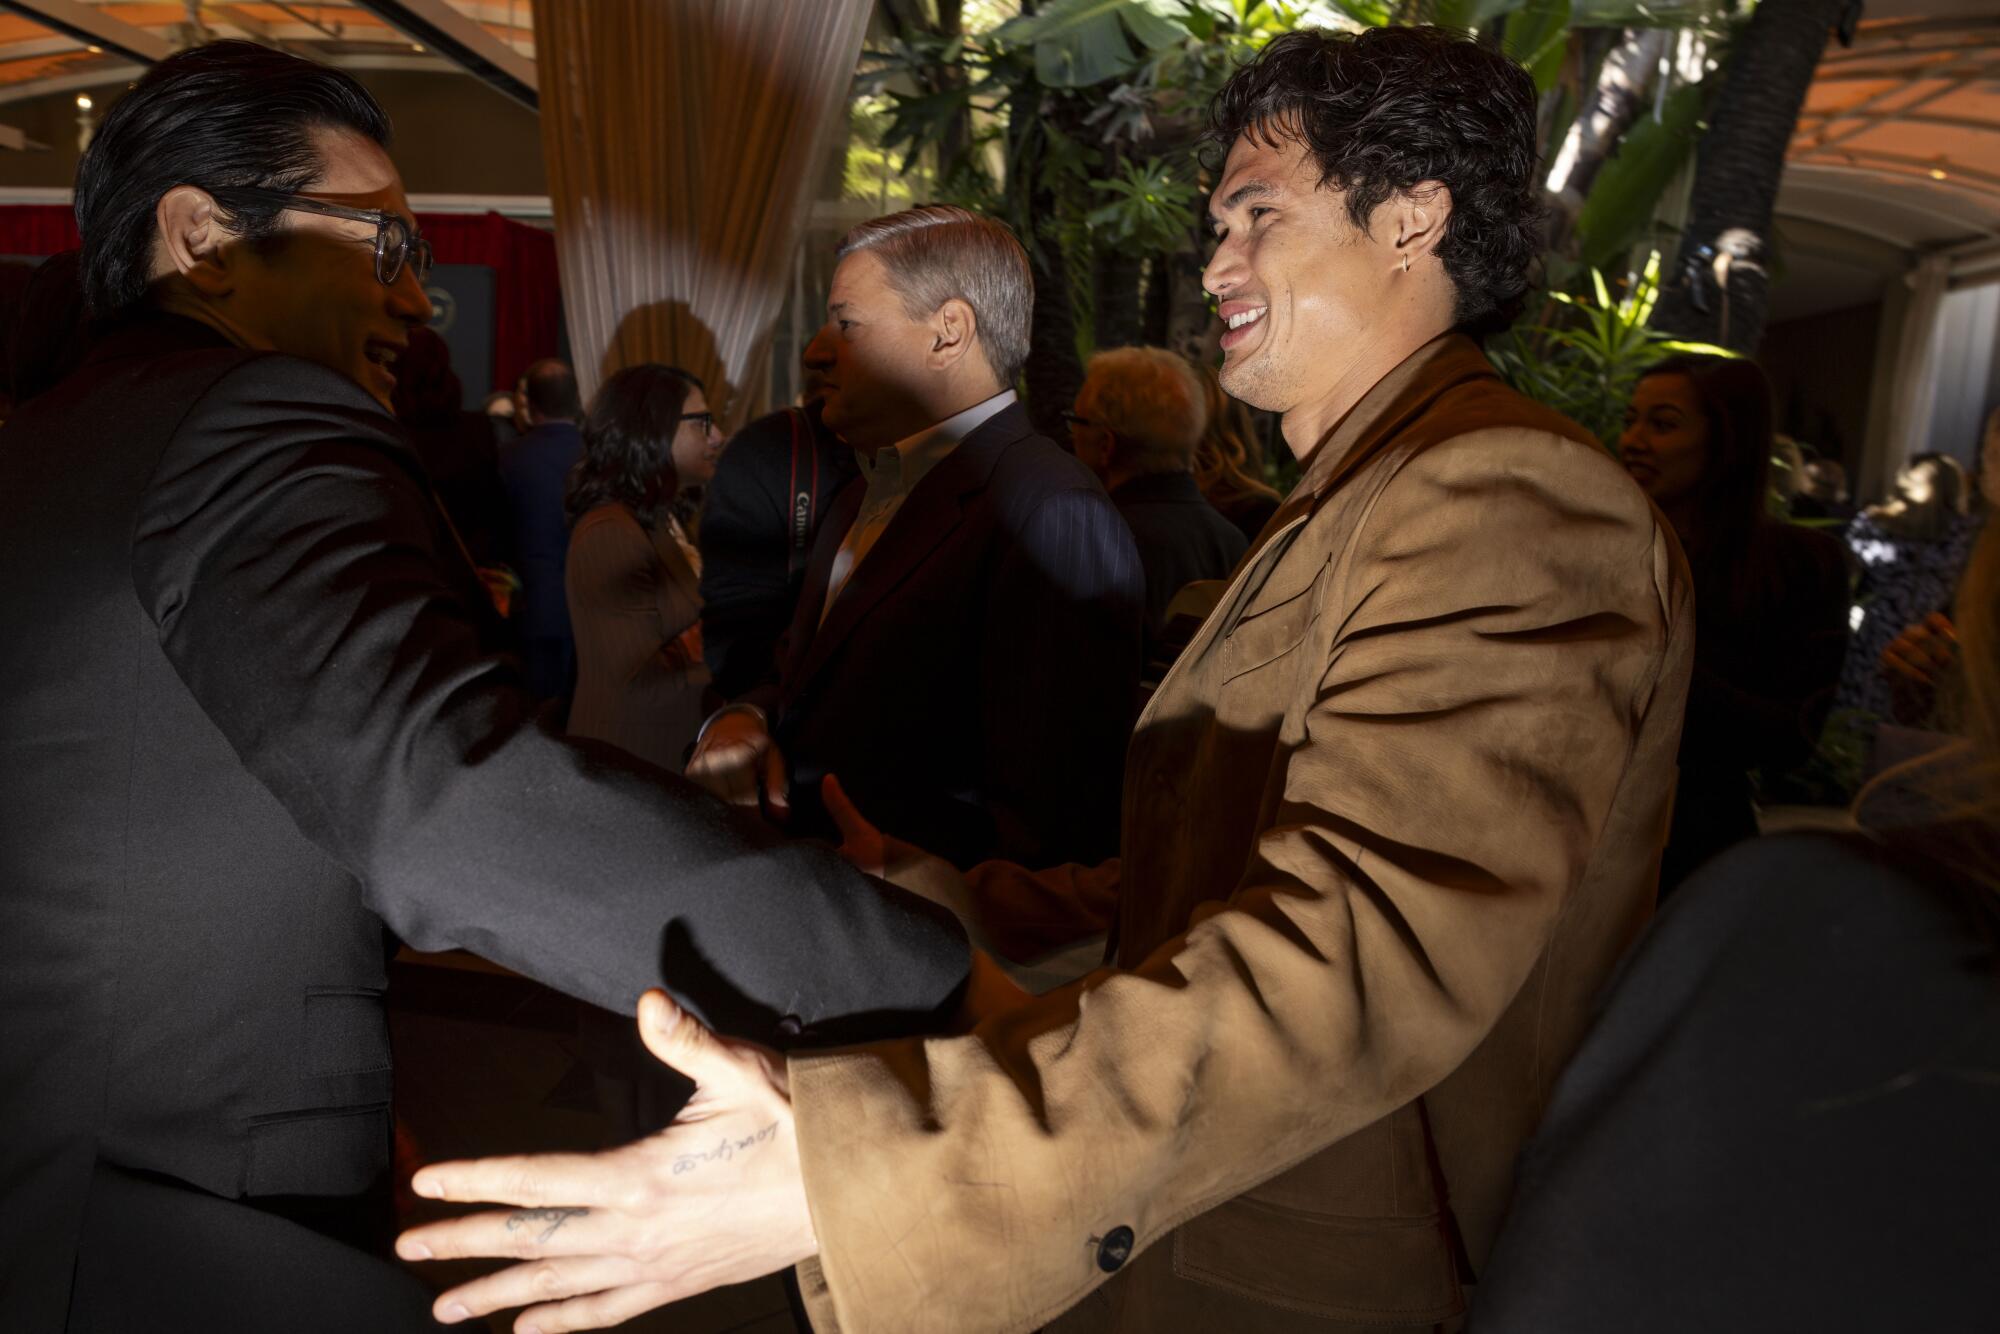 A man in a brown jacket is greeted by a man in a black jacket at a party.